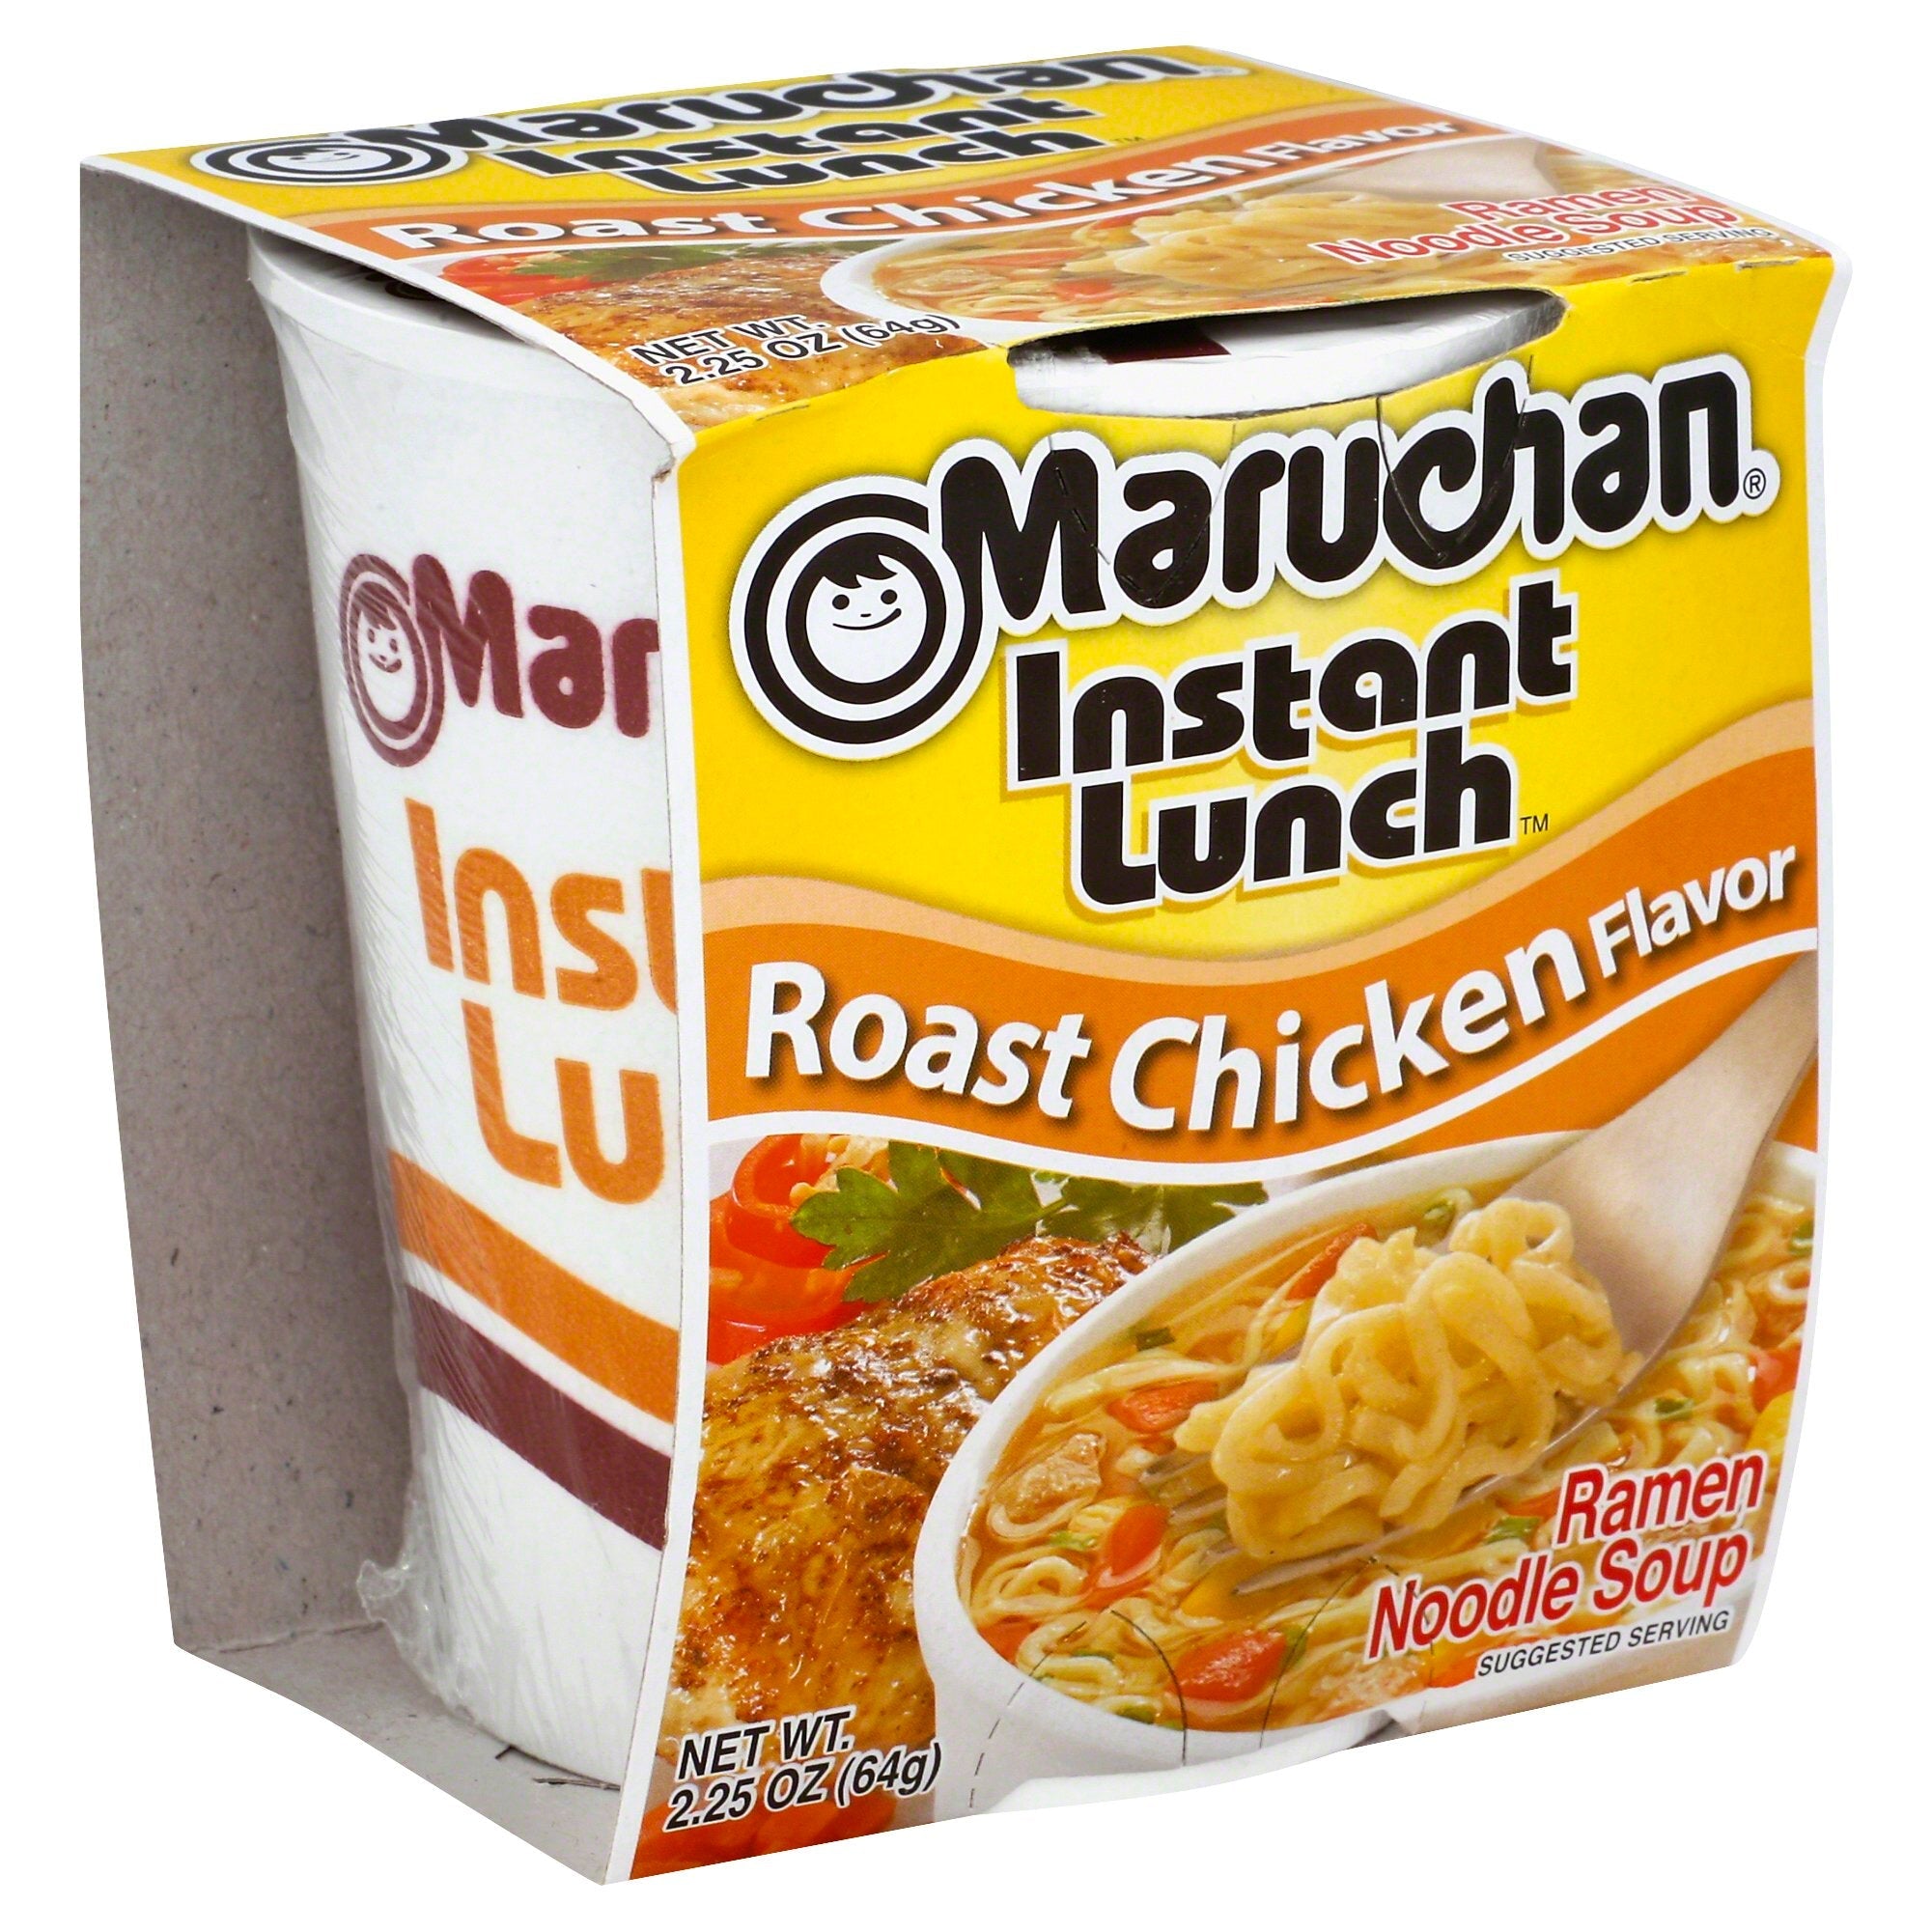 Maruchan Instant Lunch Cheddar Cheese, 2.25 Oz, Pack of 6